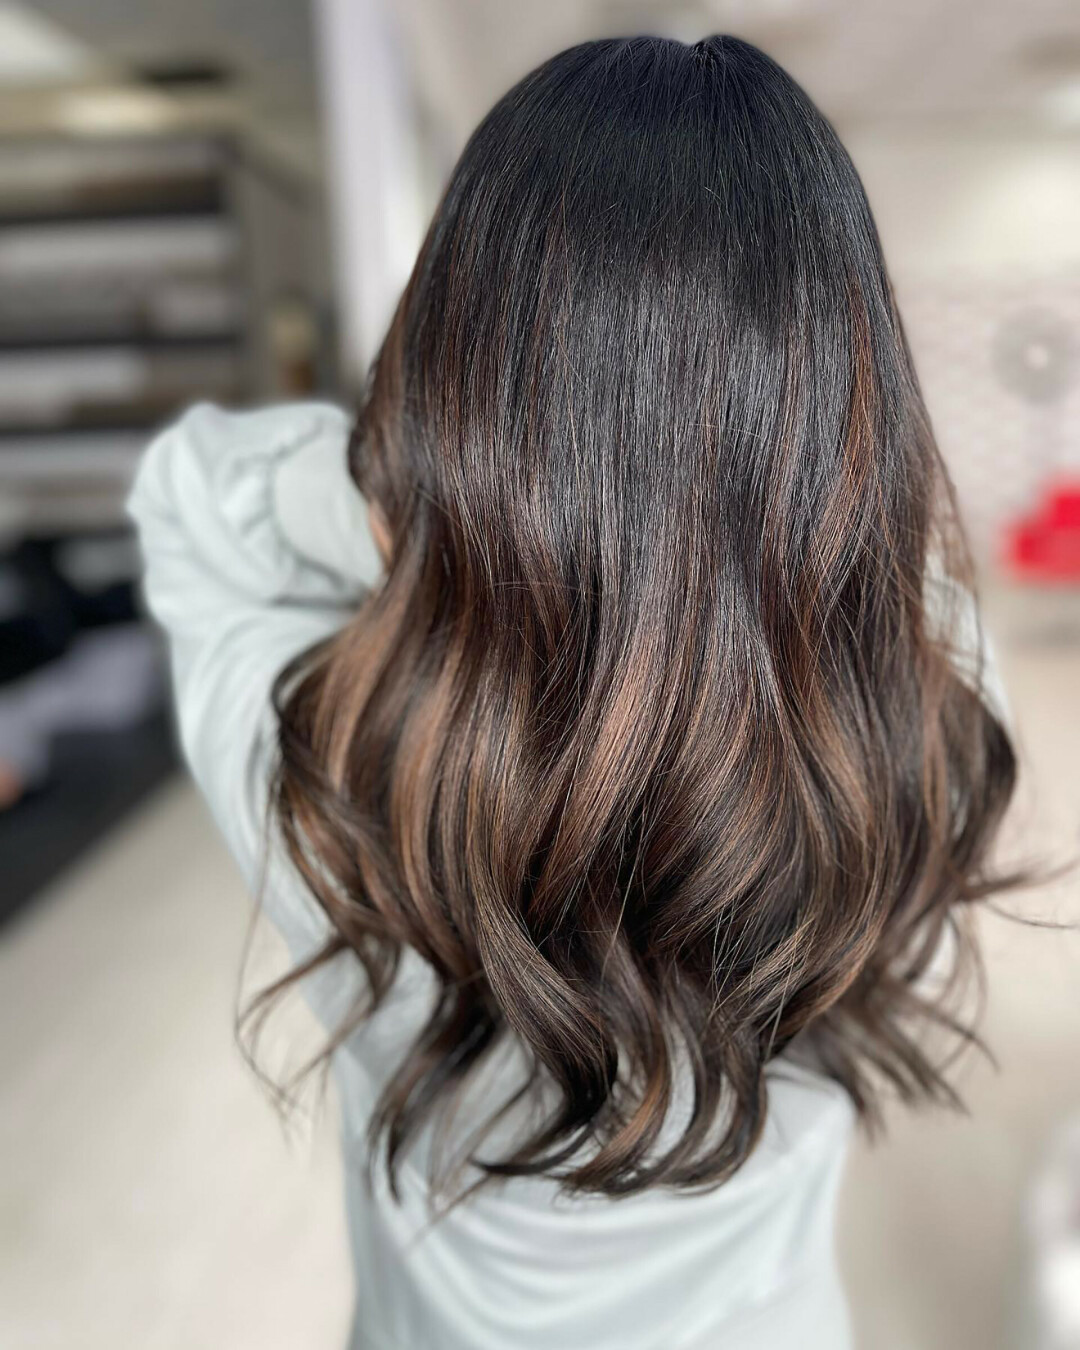 NO MORE BAD HAIR DAYS. These local salons explain recent hair trends and why it may be a good change for you. (Photo via Saxy Salon Facebook)